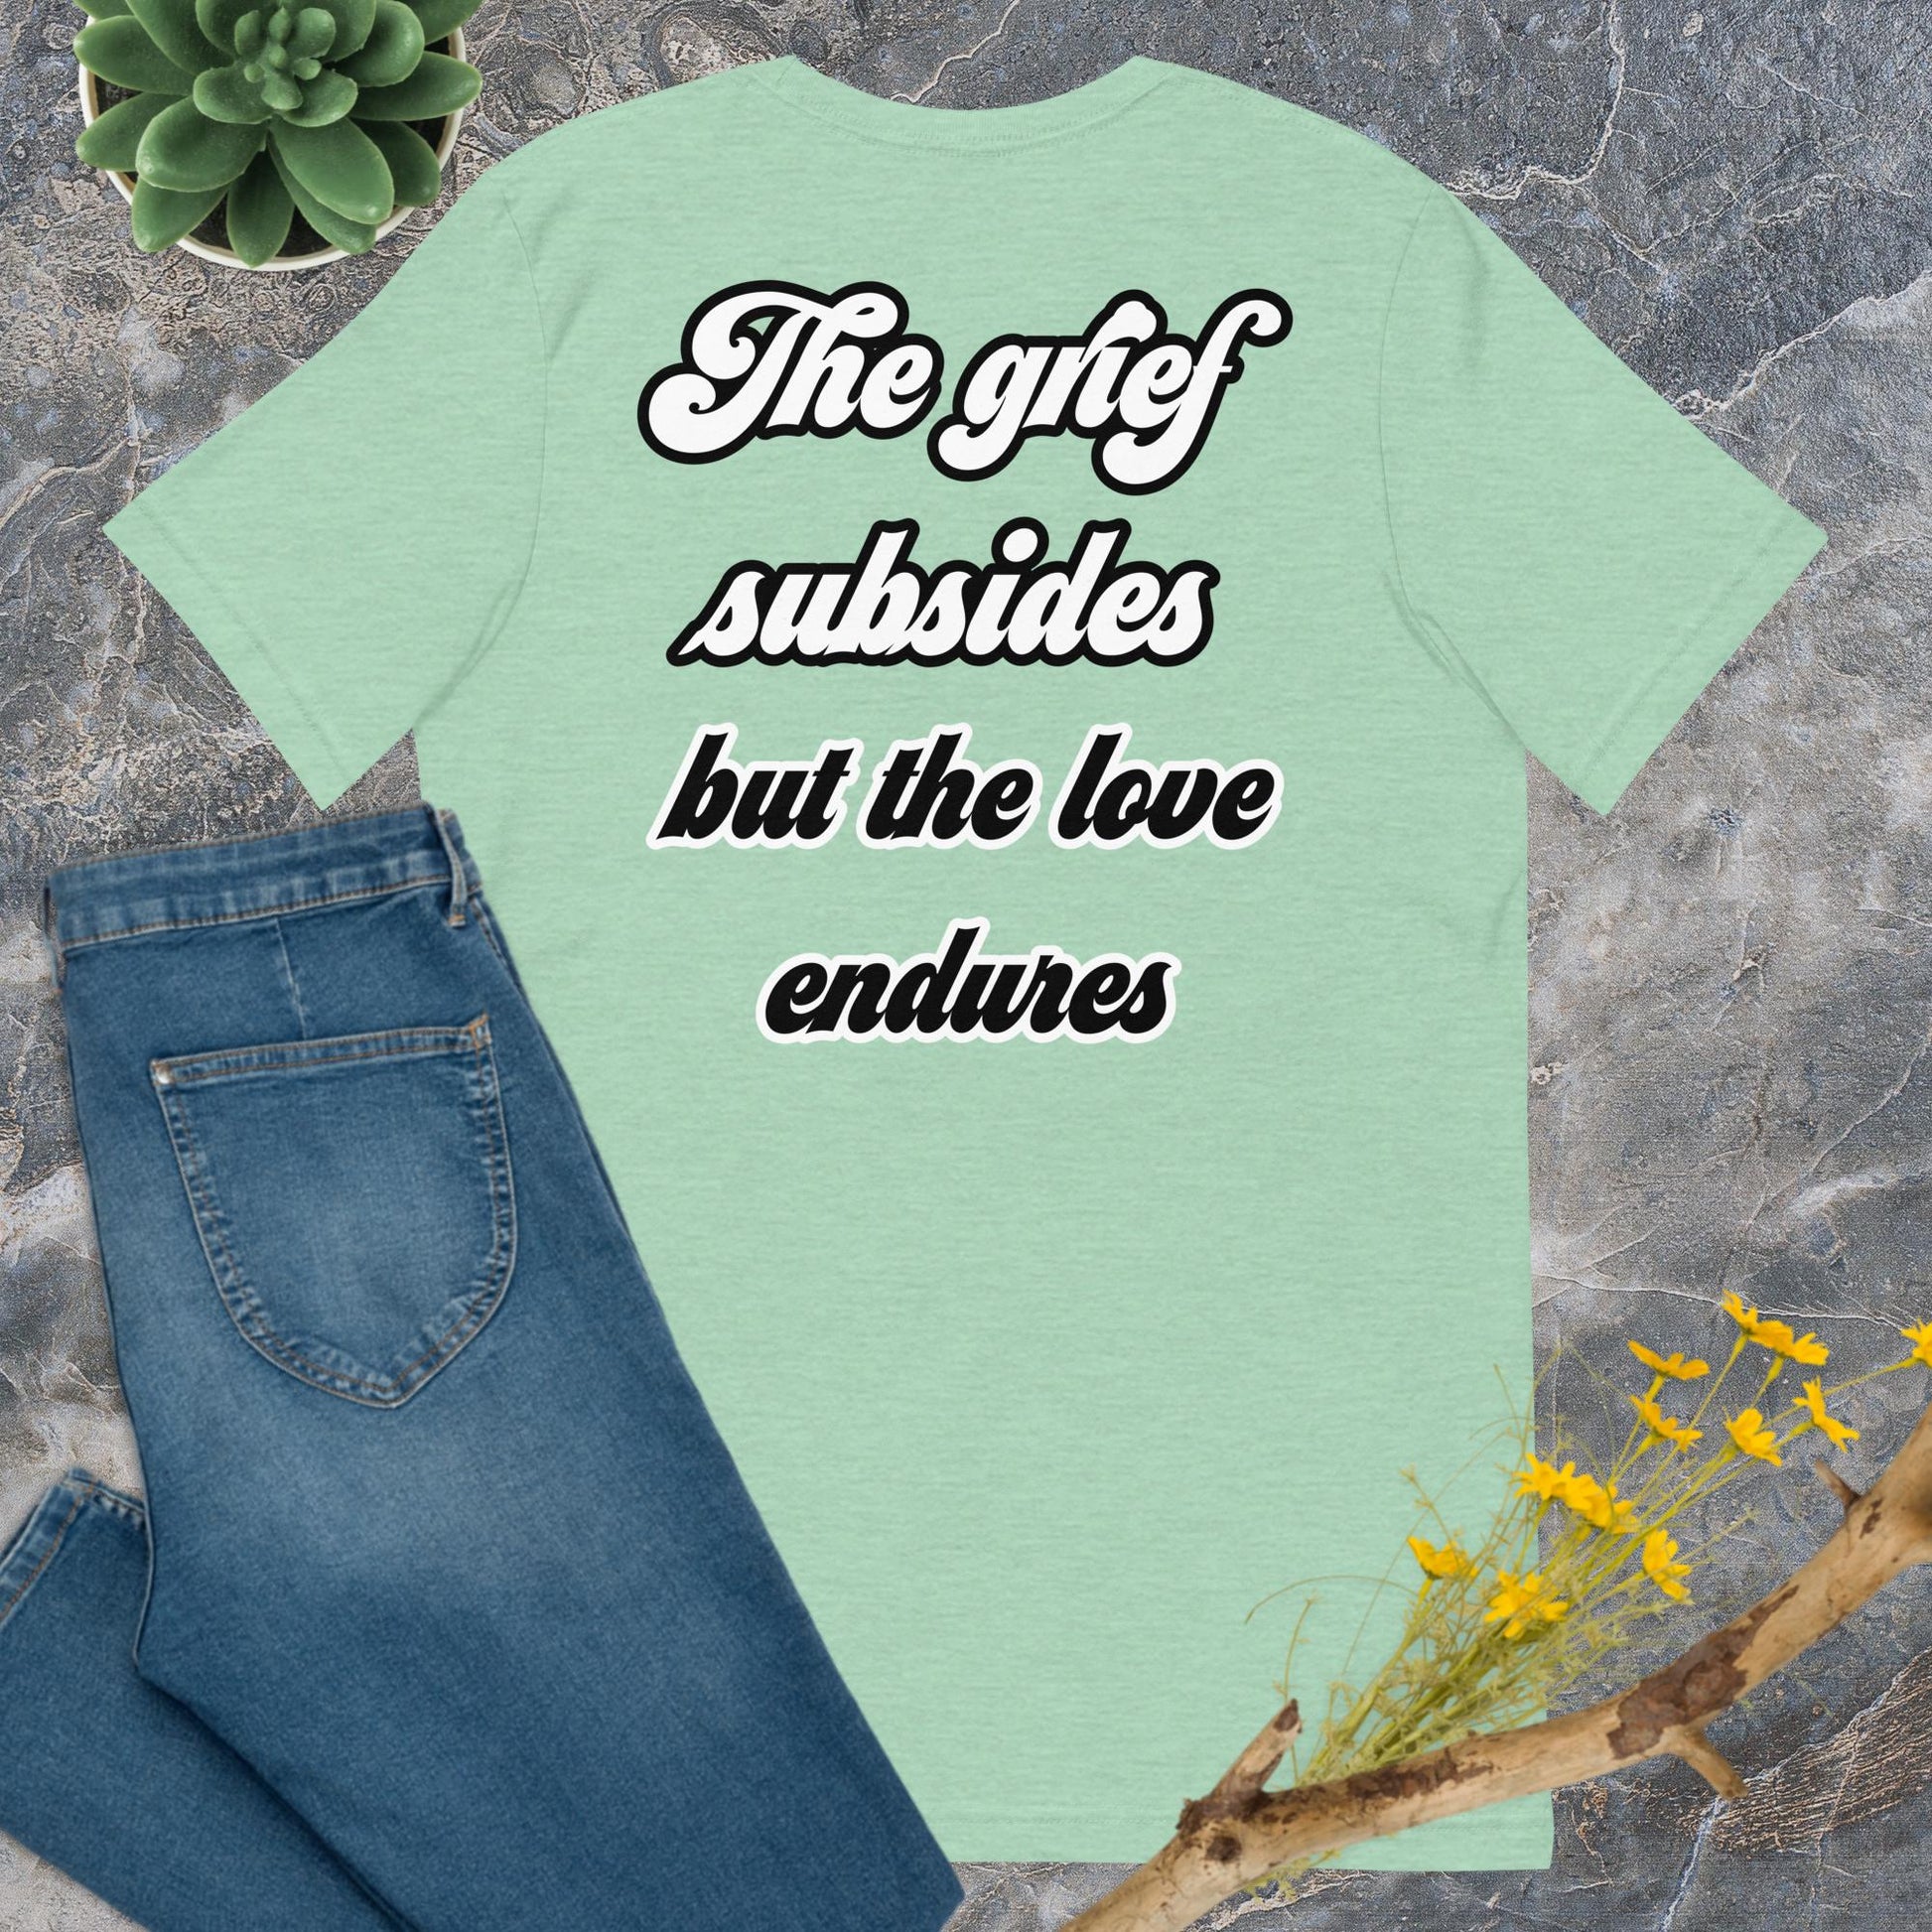 Bella + Canvas 3001 t-shirt. Heather prism mint colored (light green), back view. White and black scripted written quote "The grief subsides but the love endures." Shown laying flat on grey marble with blue jeans, a green succulent plant, and a brown twig with yellow flowers. Jamilliah's Wisdom Is Timeless Shop - wisdomistimeless.com.